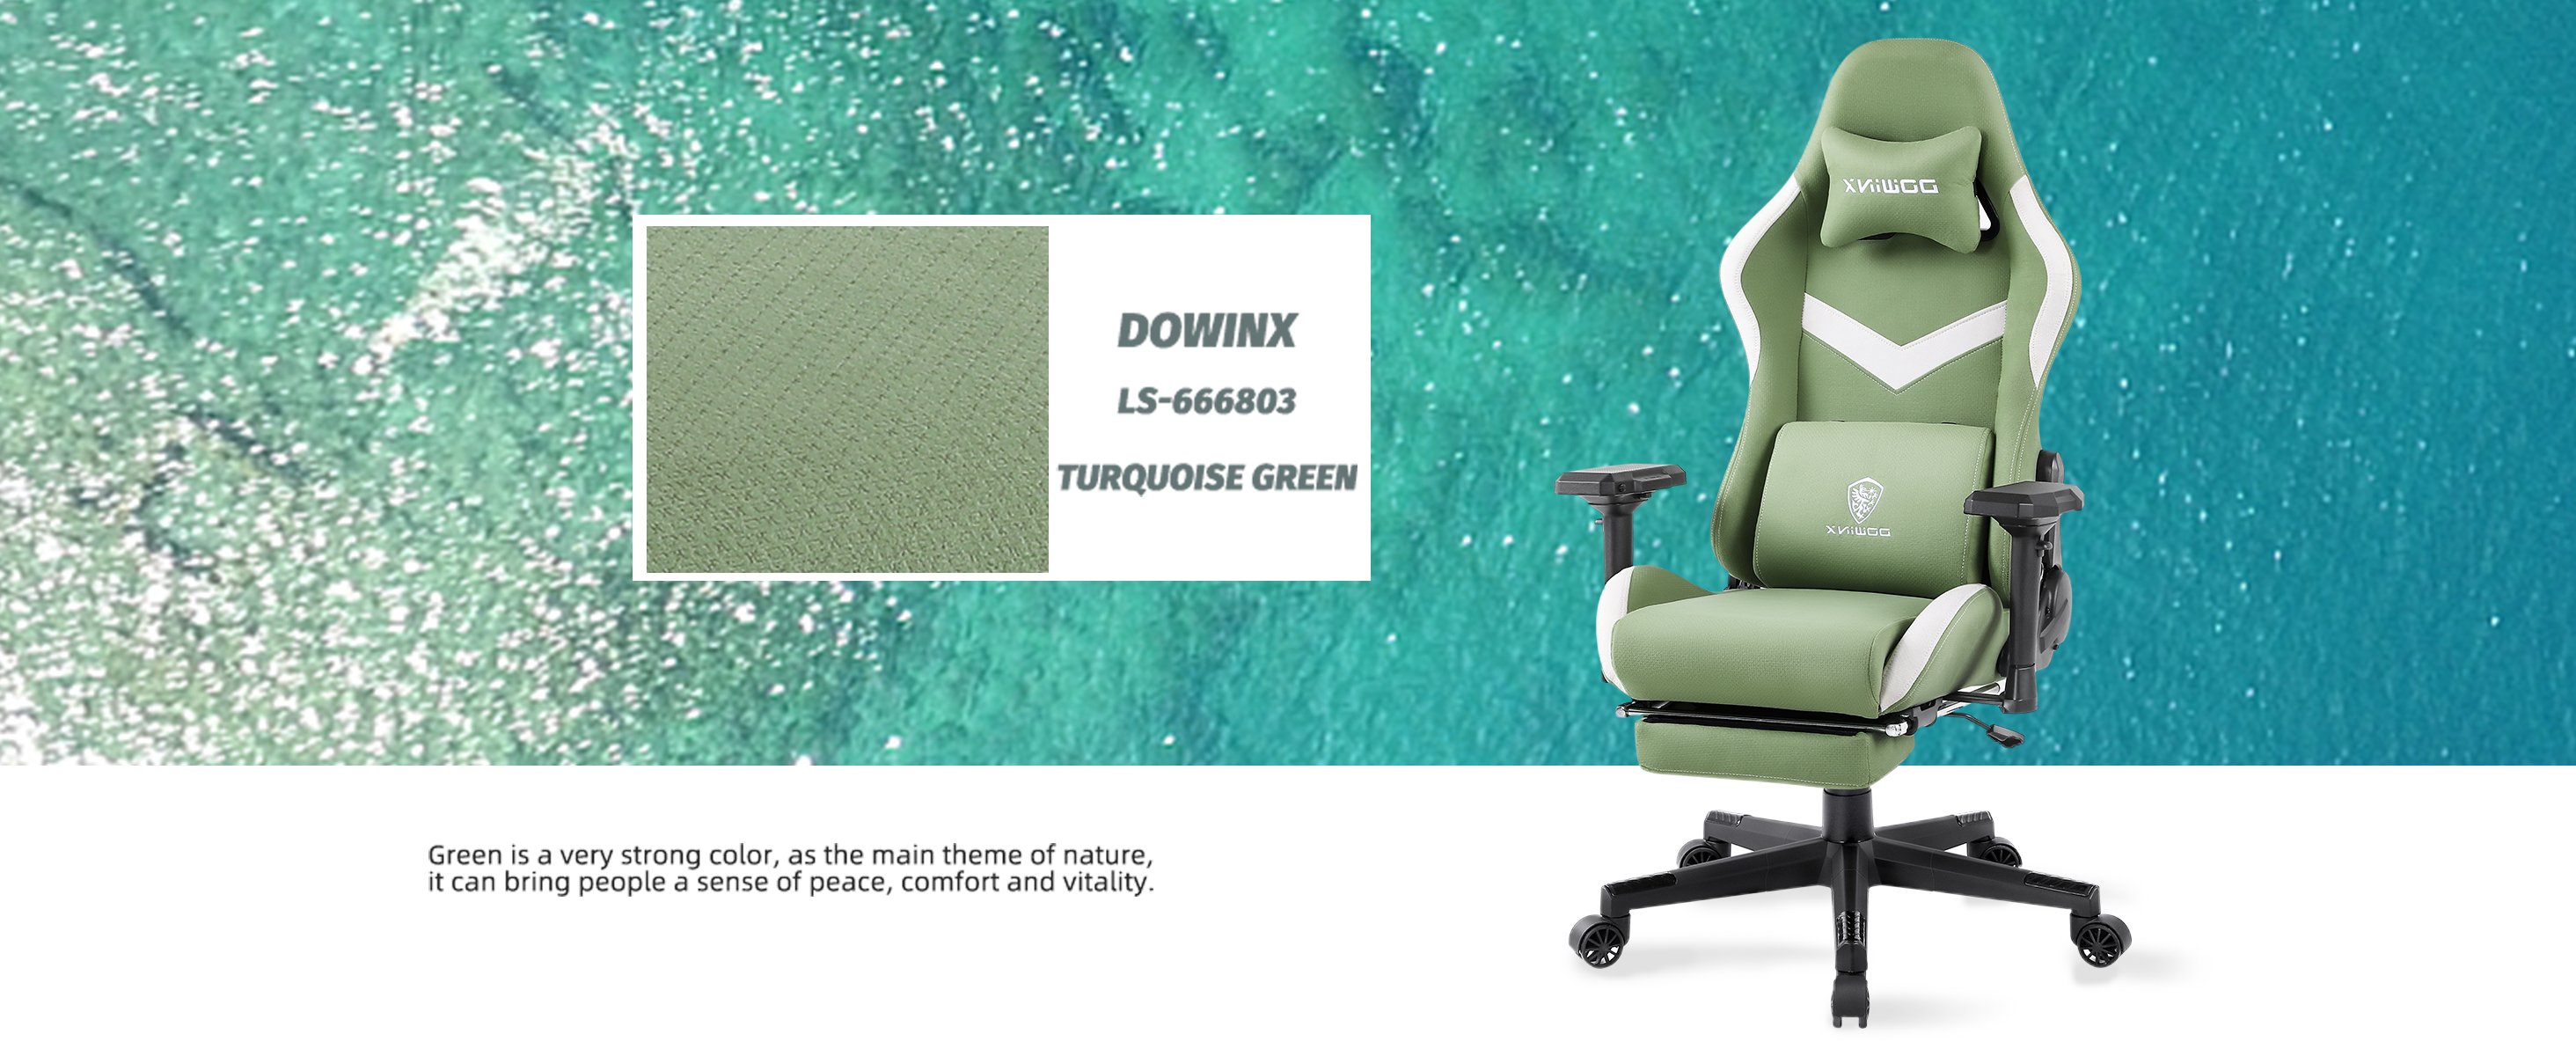 Dowinx Gaming Chair Breathable Fabric Office Chair with Pocket Spring  Cushion and Massage Lumbar Support, High Back Ergonomic Computer Chair